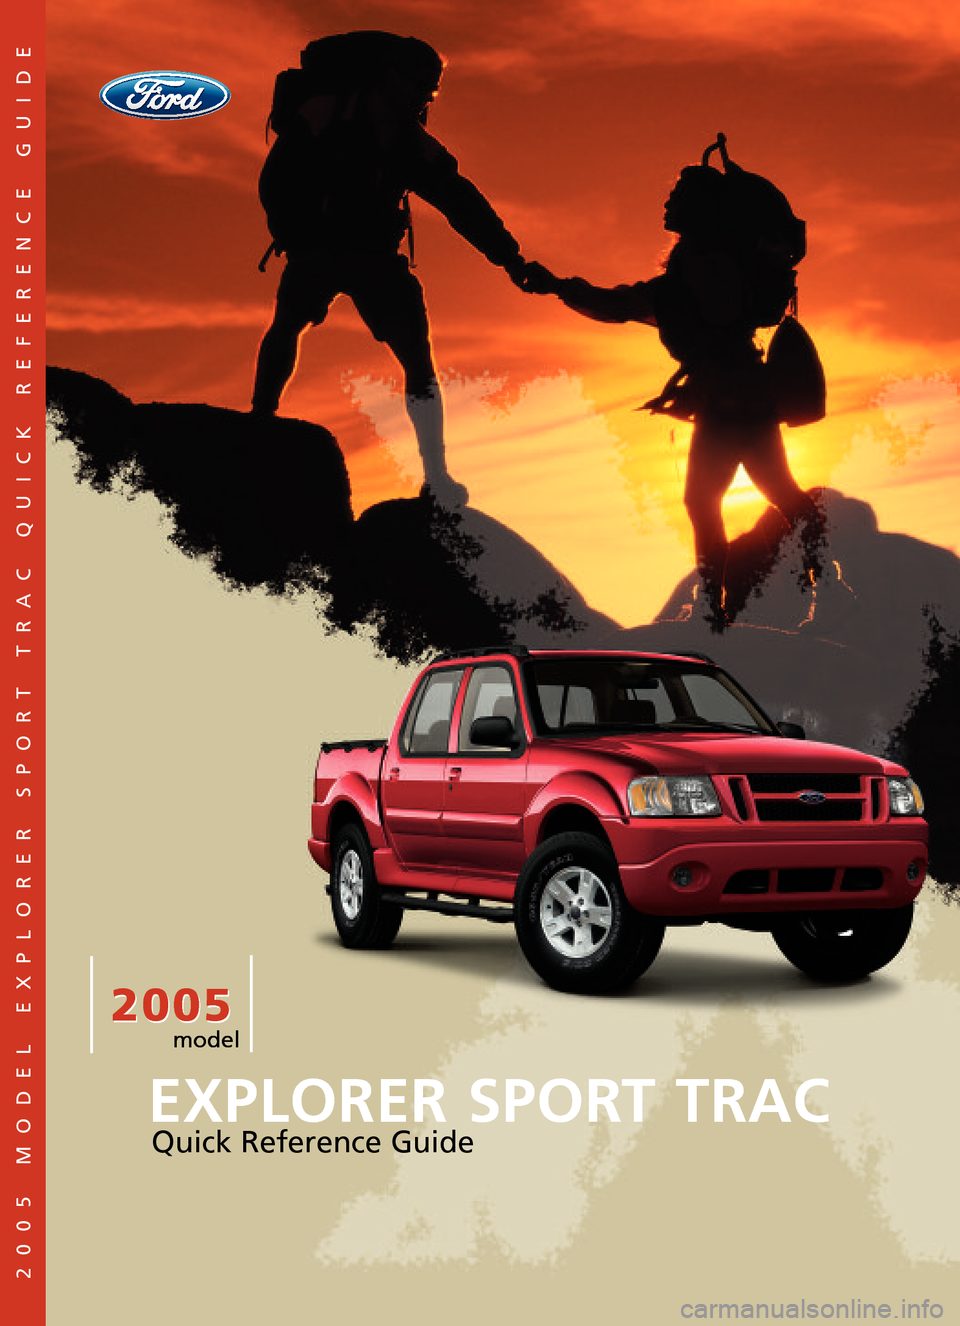 FORD EXPLORER SPORT TRAC 2005 1.G Quick Reference Guide 2005 2005
EXPLORER SPORT TRAC
Quick Reference Guide
2005 MODEL EXPLORERSPORTTRAC QUICK REFERENCE GUIDE
model 